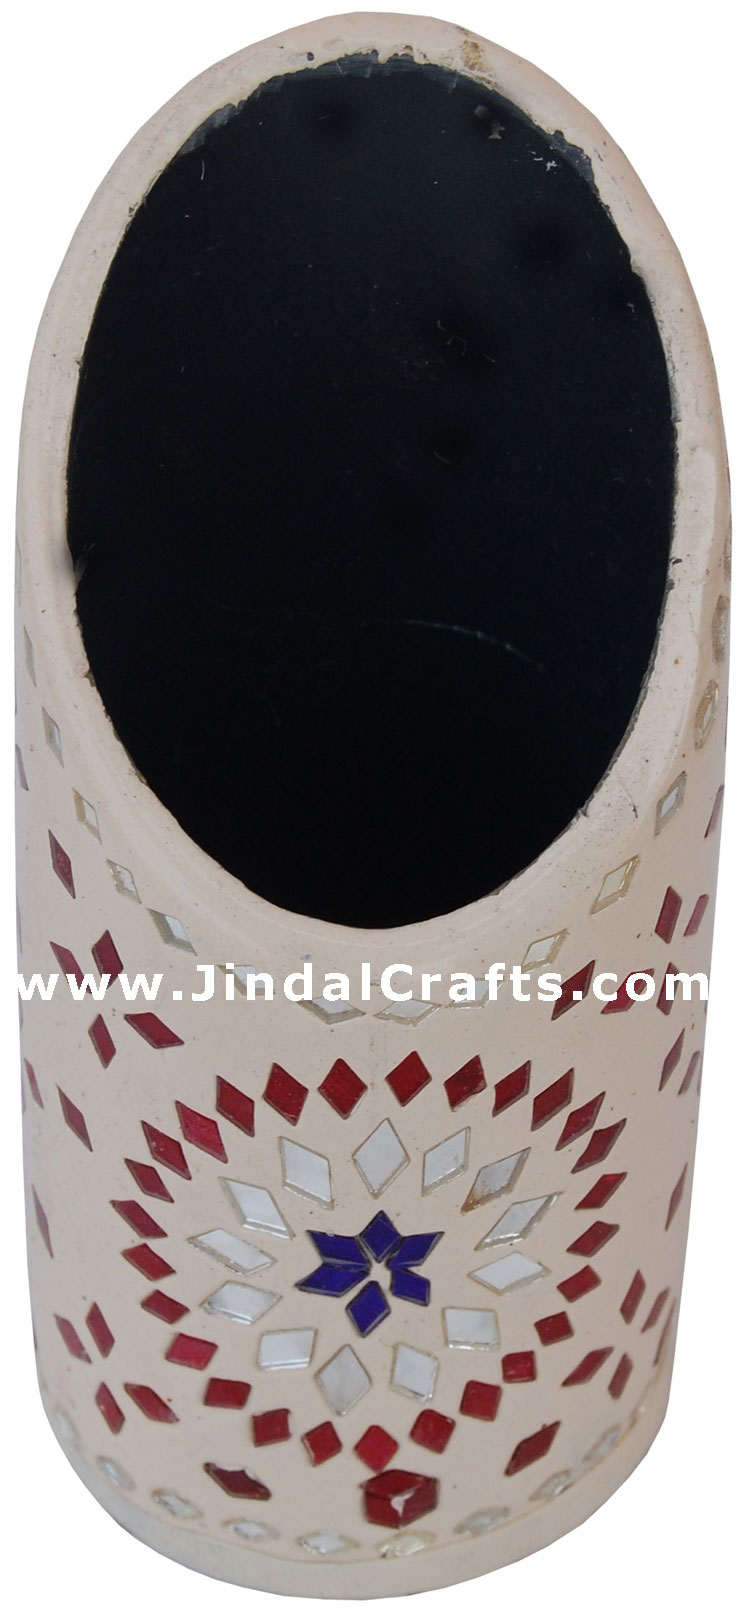 Handmade Decorative Lac Pen Stand from Indian Arts